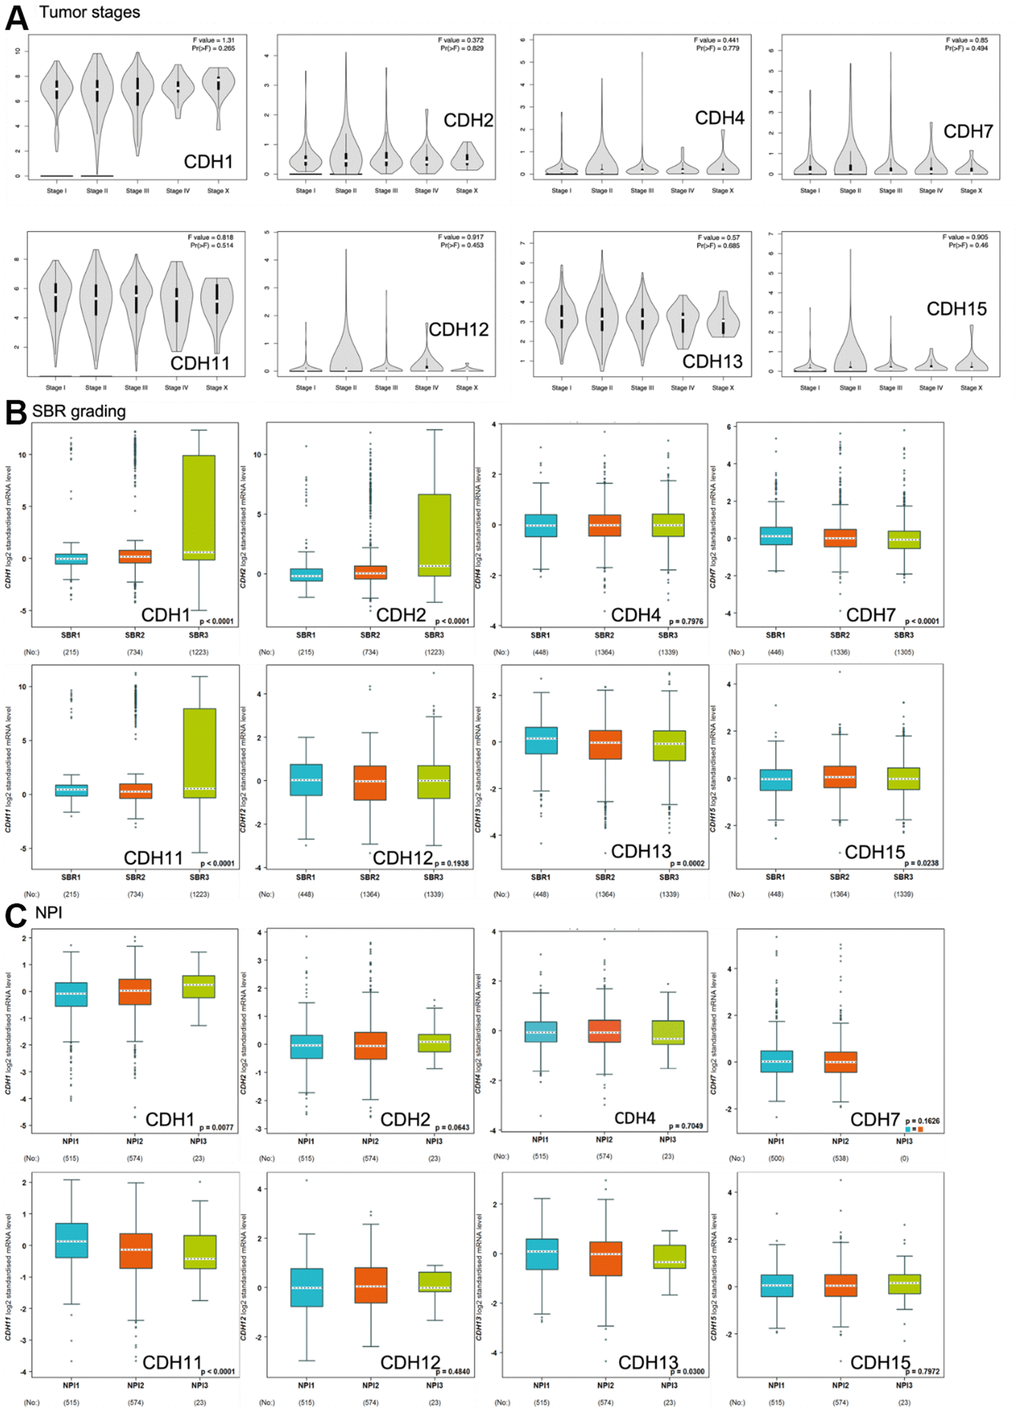 Expression of cadherin (CDH) family genes in subgroups of breast cancer patients. (A) Gene expression analysis among the stages of CDH genes in a breast cancer (GEPIA2) database. The violin plot displayed comparisons of CDH genes expressions from TCGA dataset of breast cancer. An independent t-test was utilized for p values; pF) t-test. (B) Scarff-Bloom-Richardson (SBR) grading of CDH family genes. Associations between CDH1/2/4/7/11/12/13/15 and SBR grading were analyzed via the bc-GenExMiner dataset. (C) The Nottingham prognostic index (NPI) of CDH family genes. Associations between CDH1/2/4/7/11/12/13/15 and NPI values were analyzed via the bc-GenExMiner dataset.